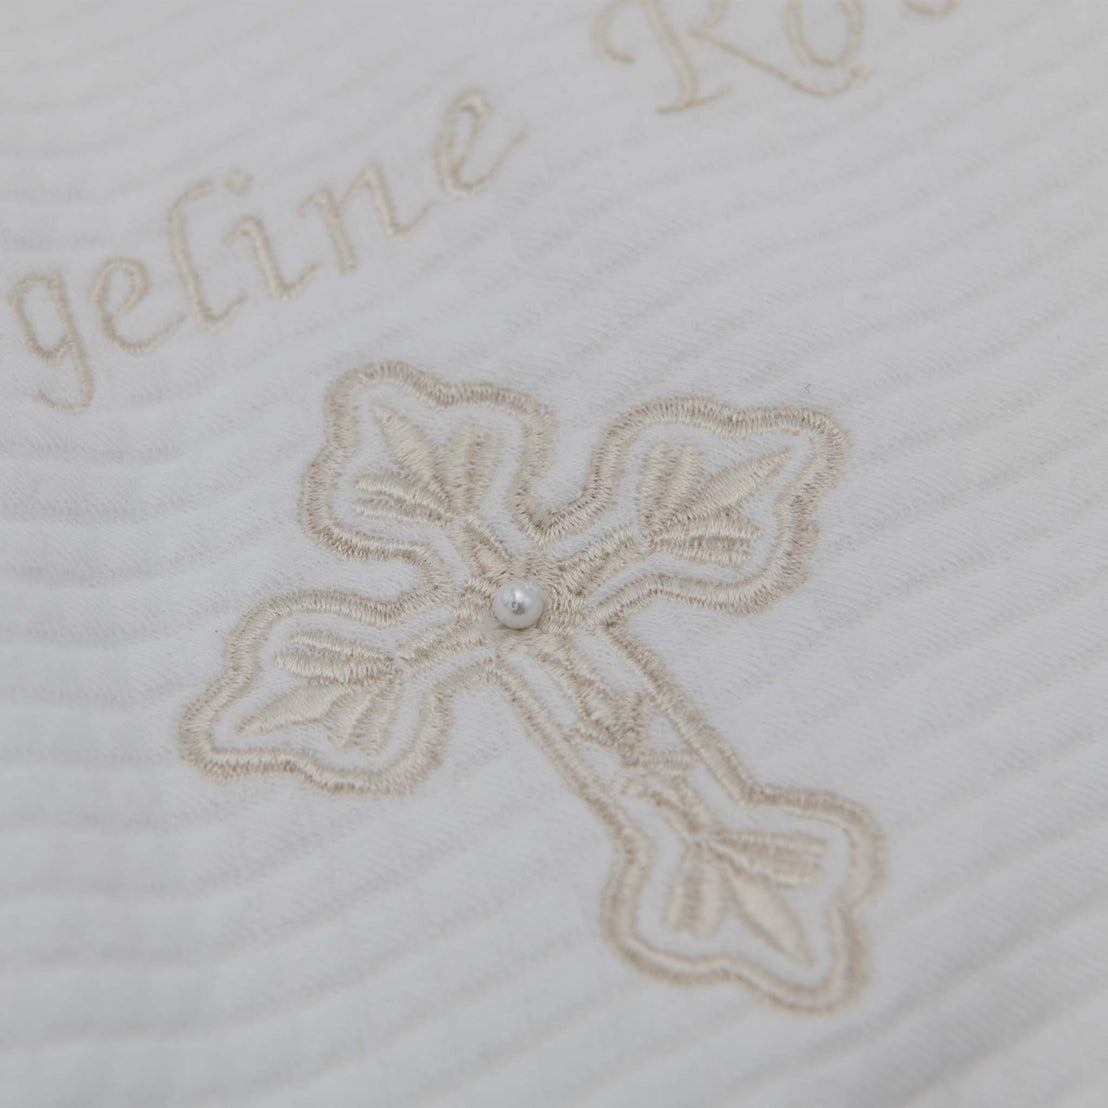 Close-up of a white Personalized Cross Blanket embroidered with the name "angeline rose" in cursive and a detailed cross design with a pearl at the center, used for baptism or christening